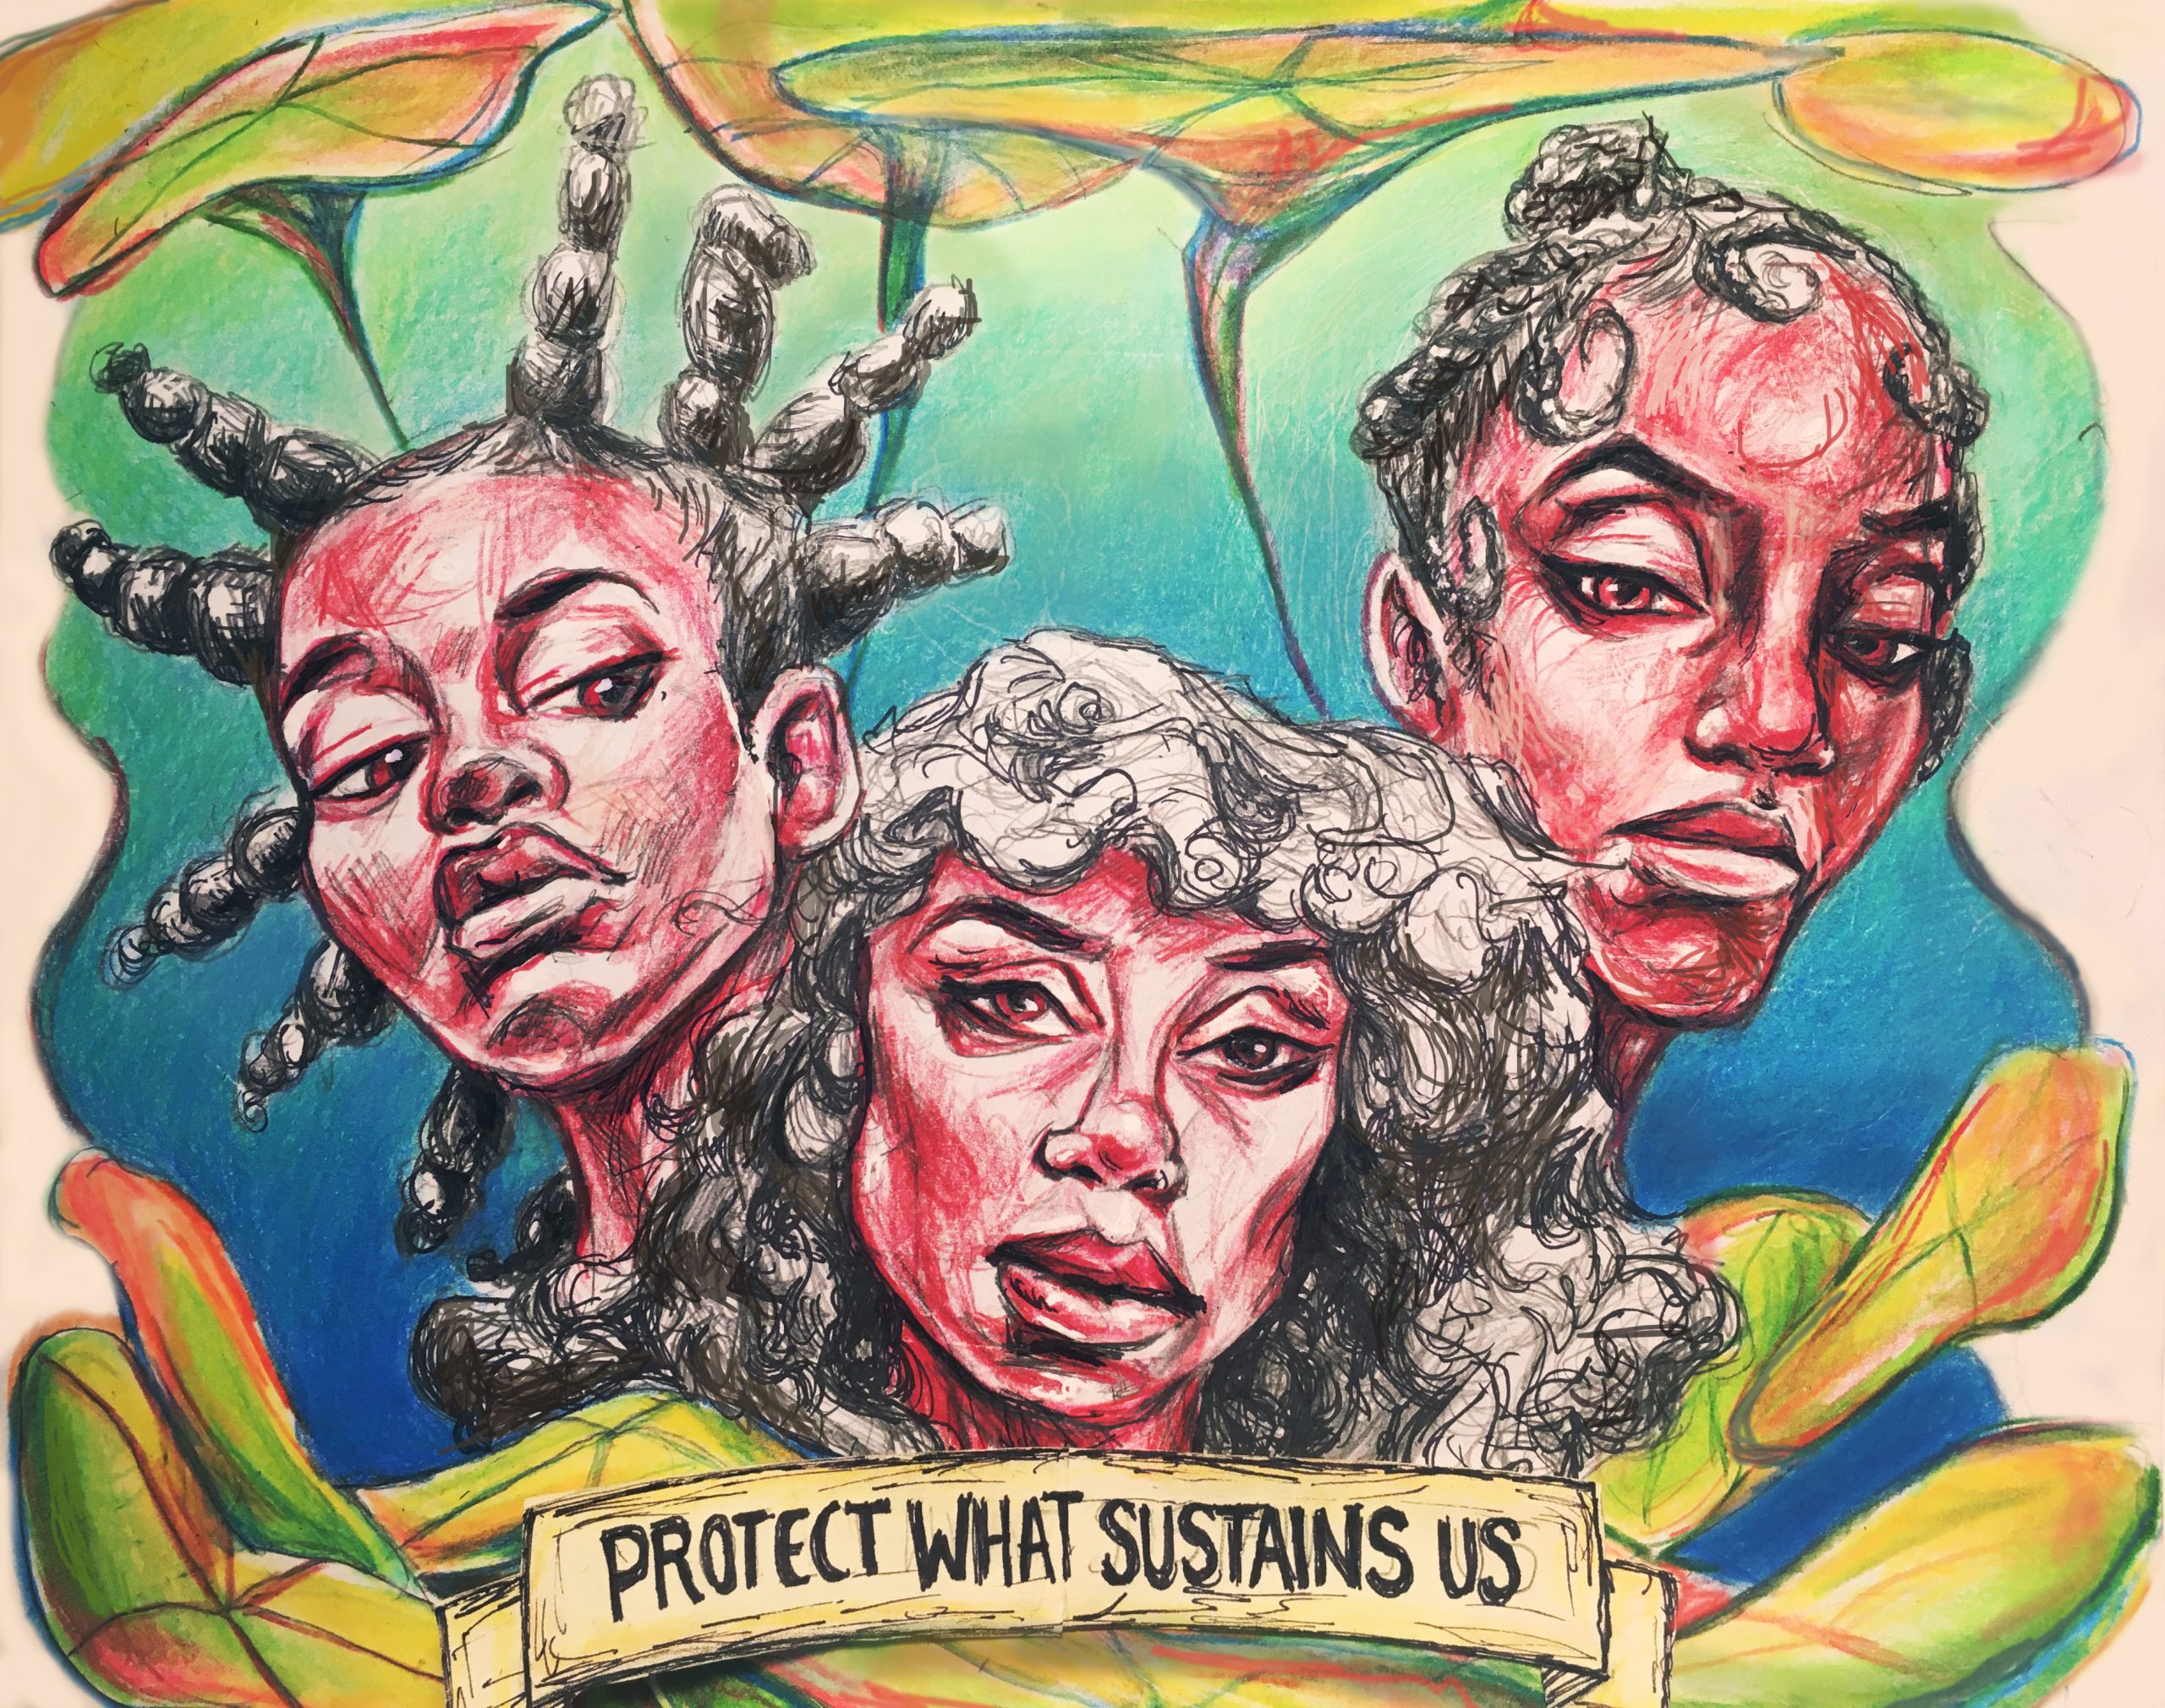 A drawing of three Black women with the caption "Protect what sustains us."